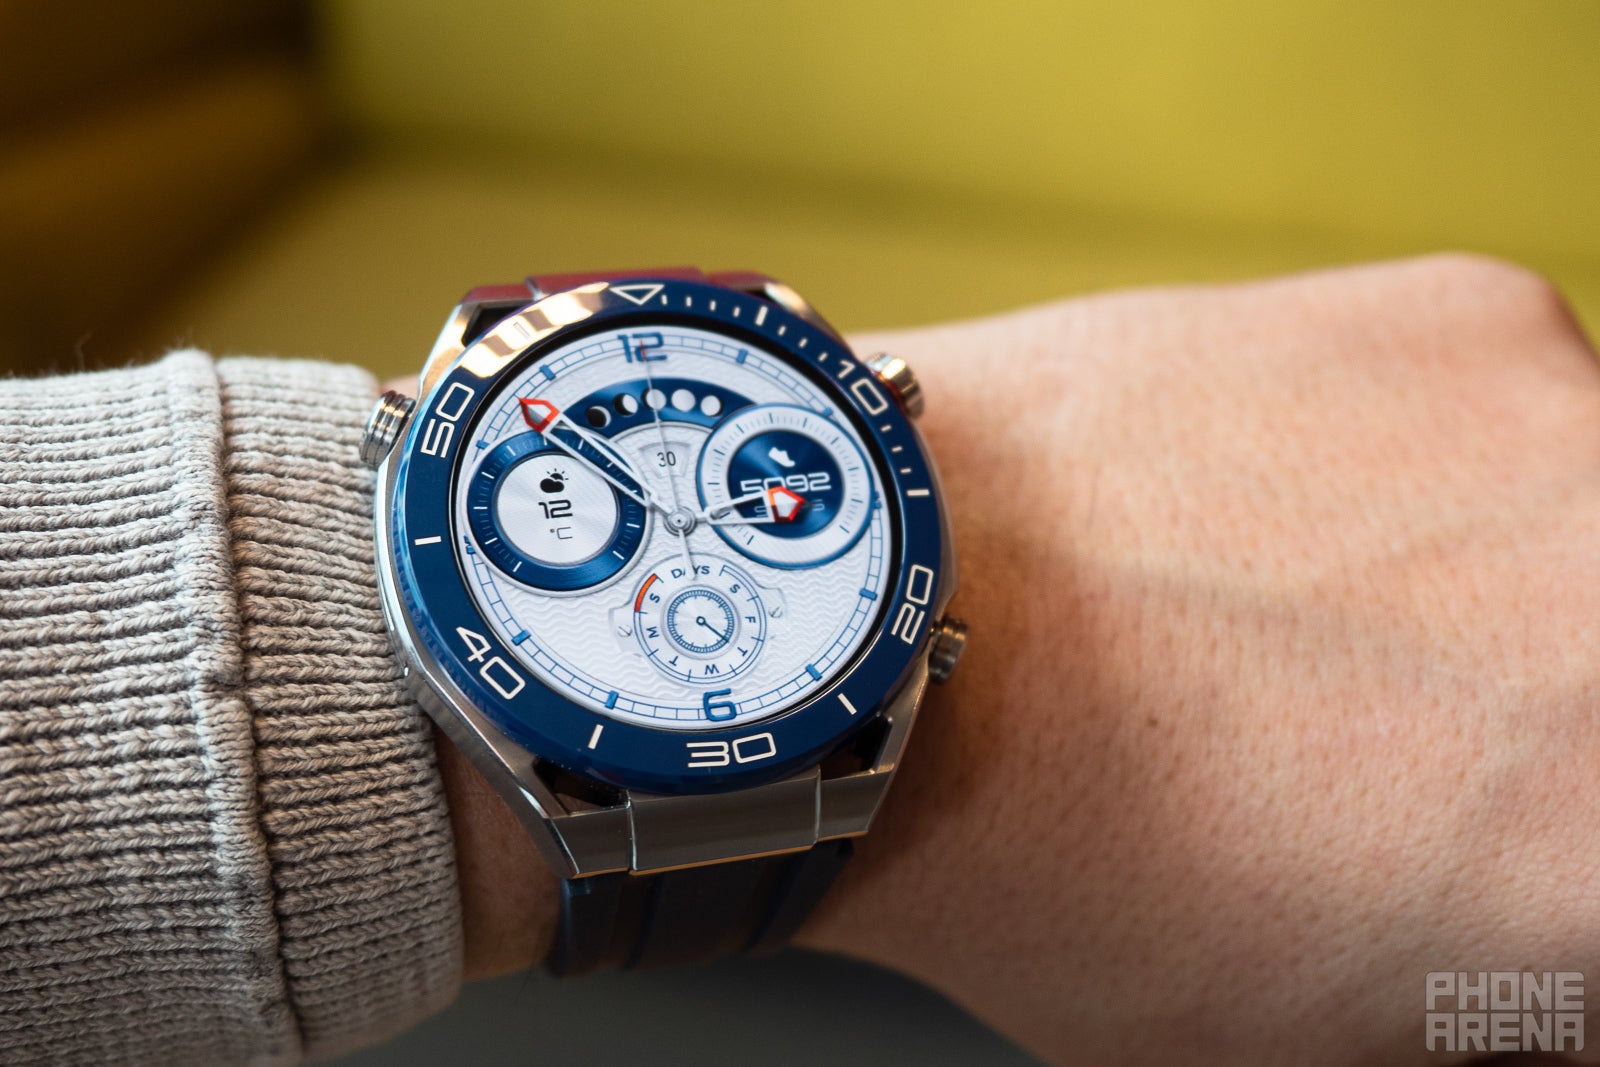 Huawei Watch Ultimate global launch on April 4 - Huawei Central